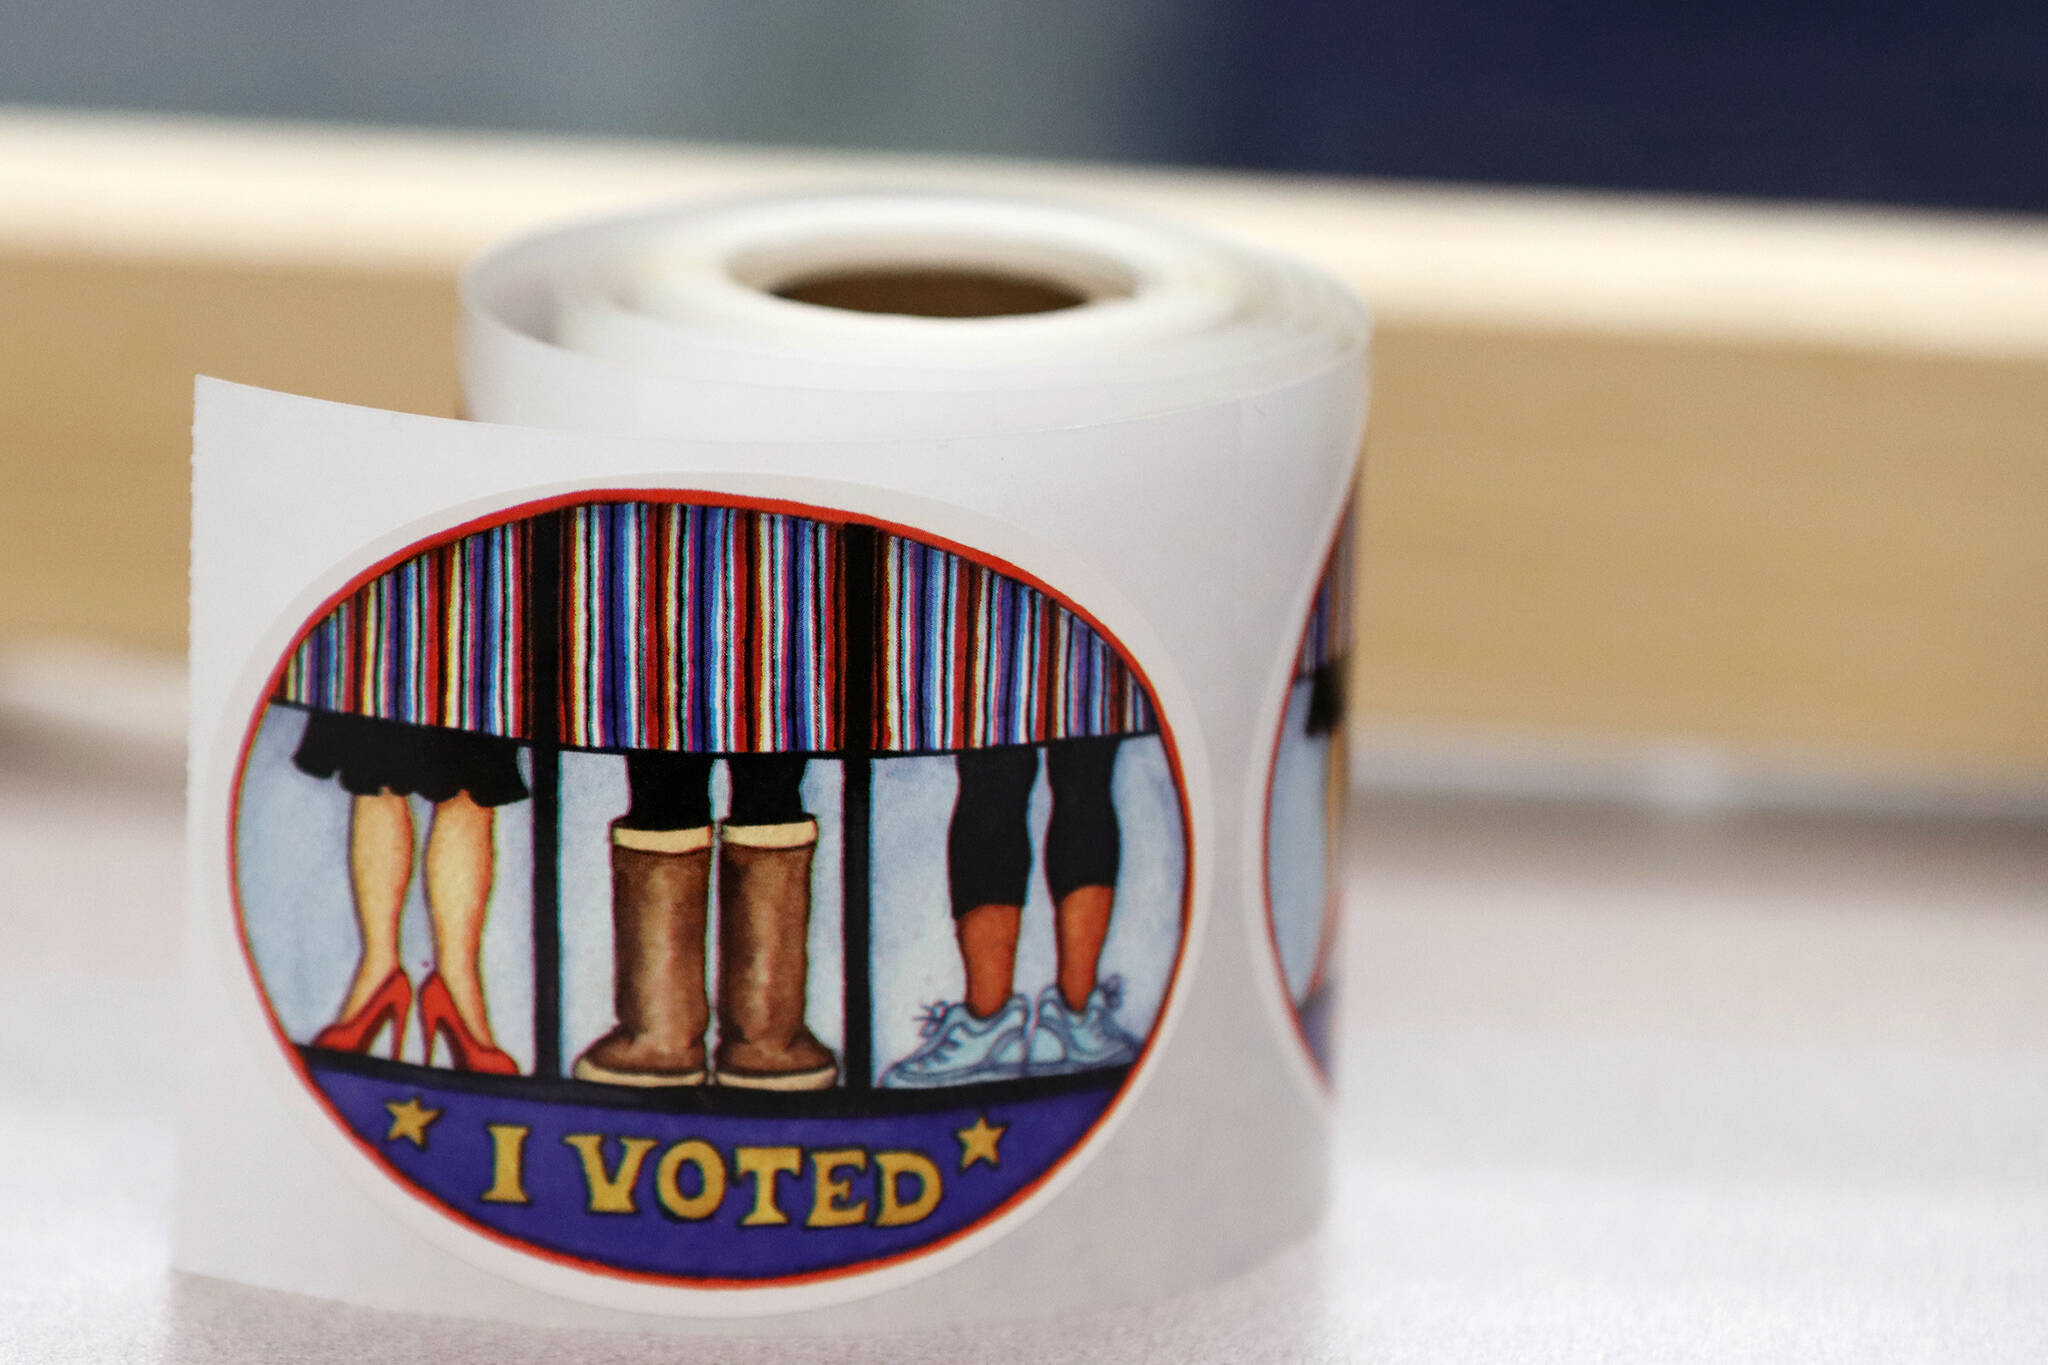 A roll of “I voted” stickers await voters on Saturday, June 11, 2022, at the Alaska Division of Elections office in Juneau. (Ben Hohenstatt/Juneau Empire)